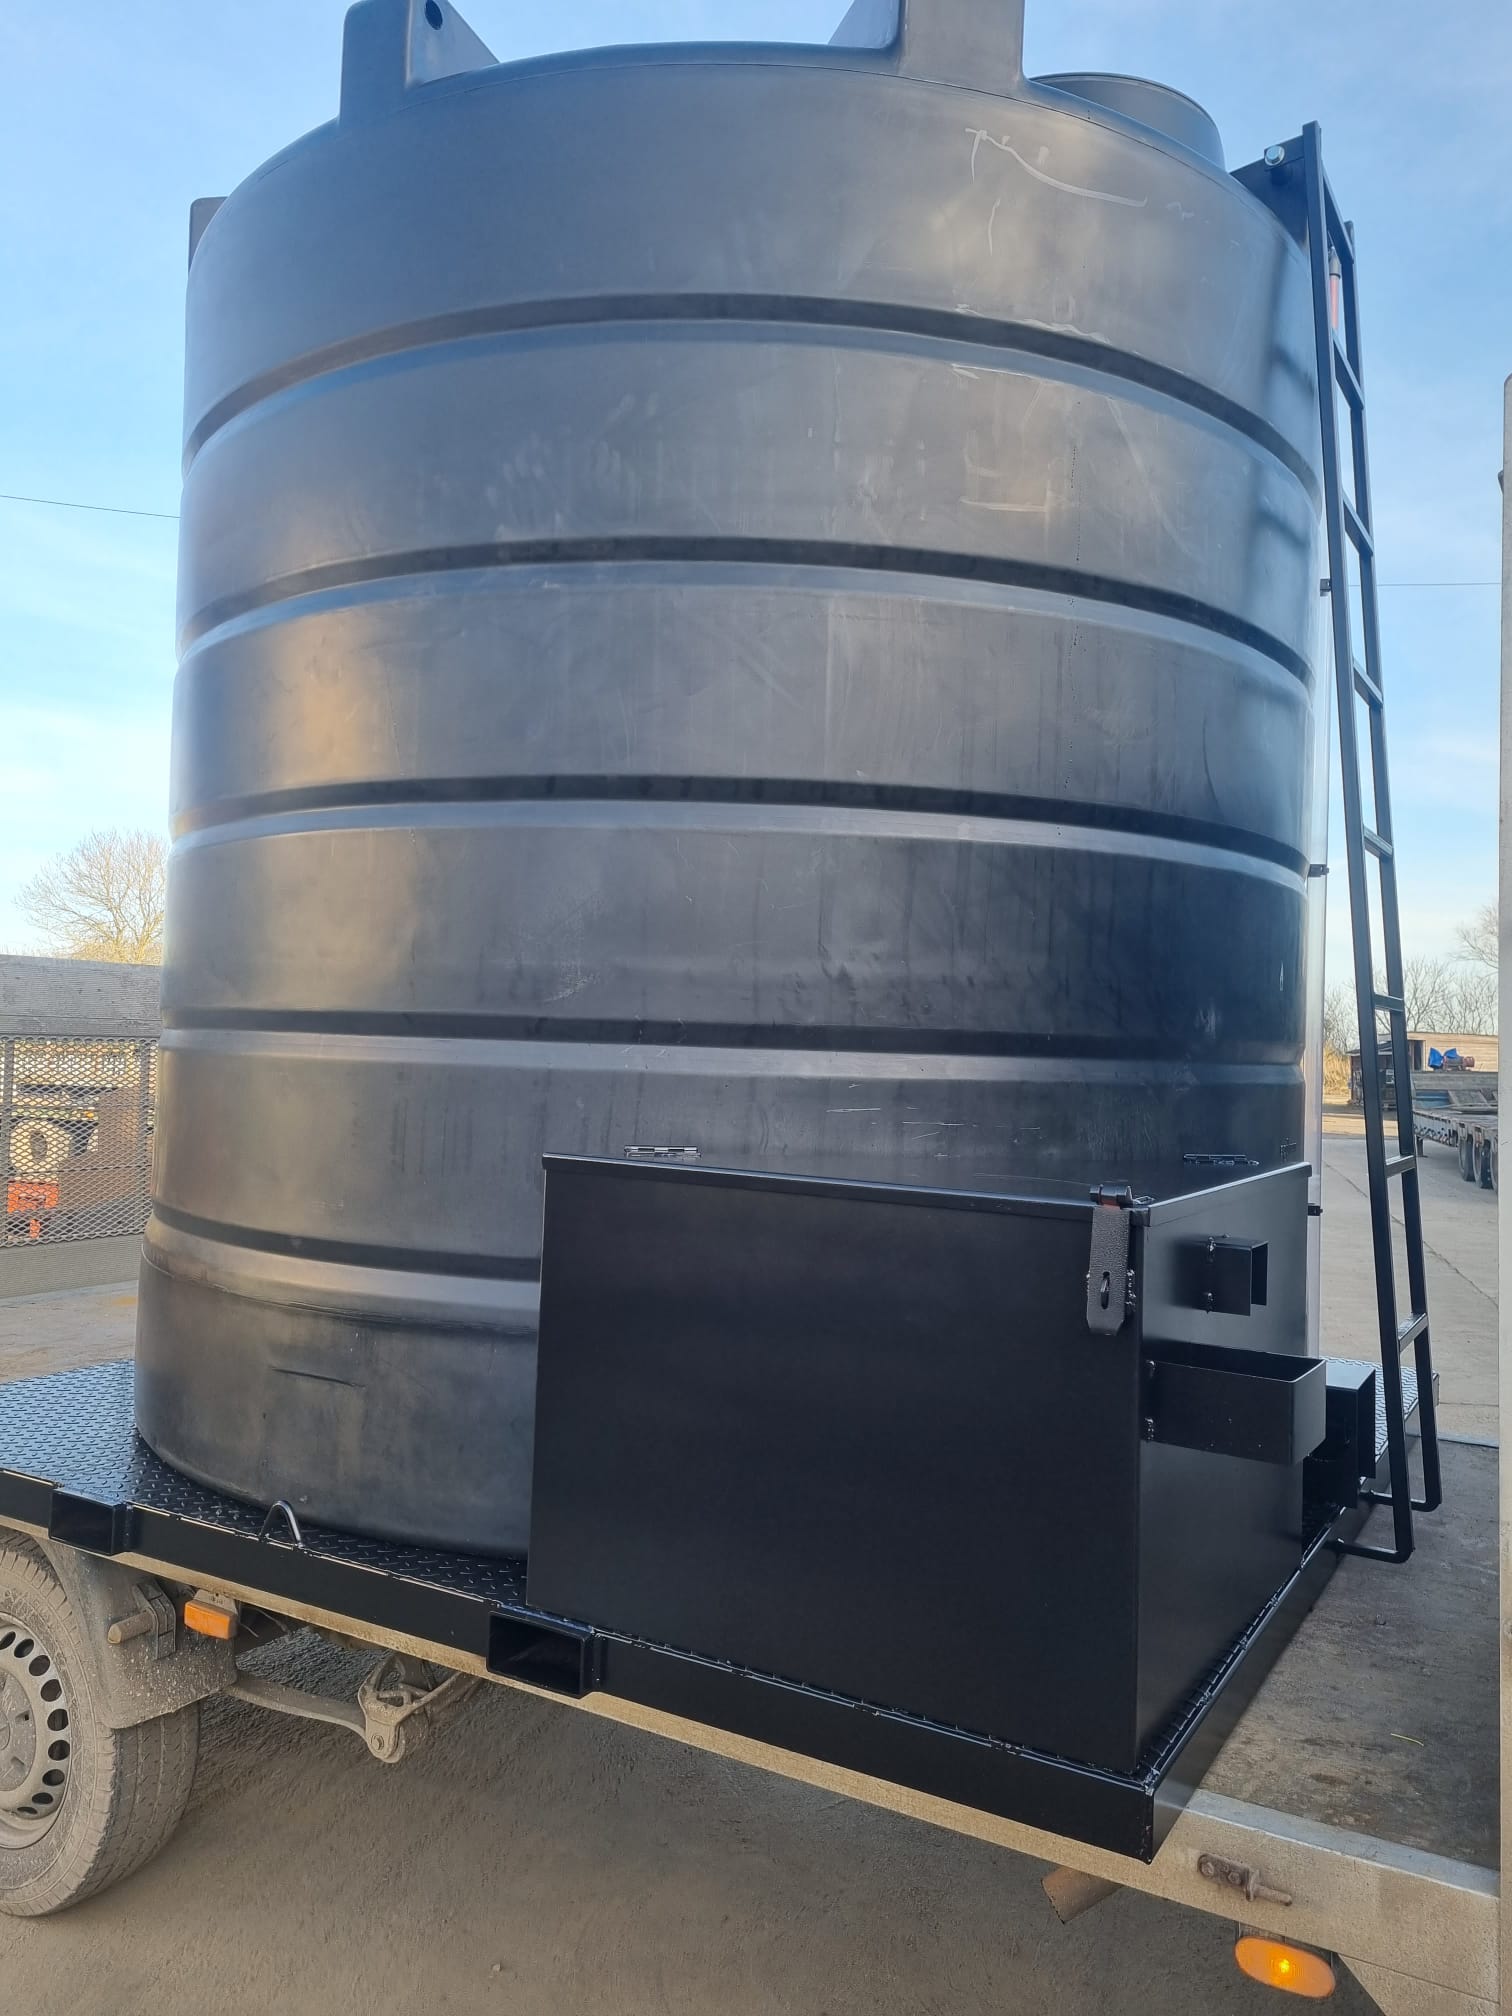 Affordable 10,000ltr Water Tank, With On Demand Pump To Hire In Lincolnshire